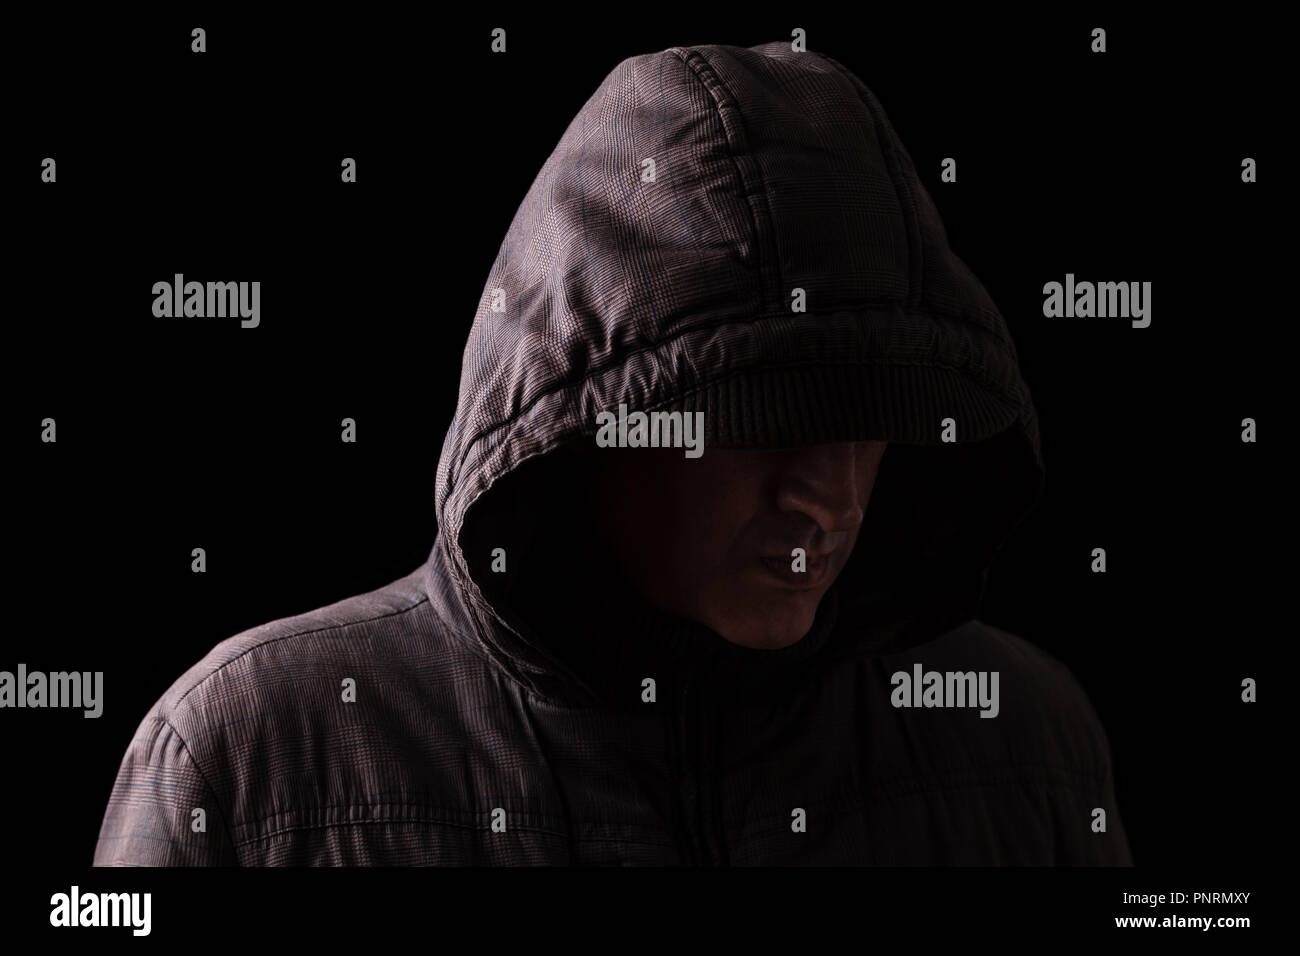 Scary and creepy caucasian or white man hiding in the shadows, with the face and identity hidden with the hood, and standing in the darkness. Low key, Stock Photo